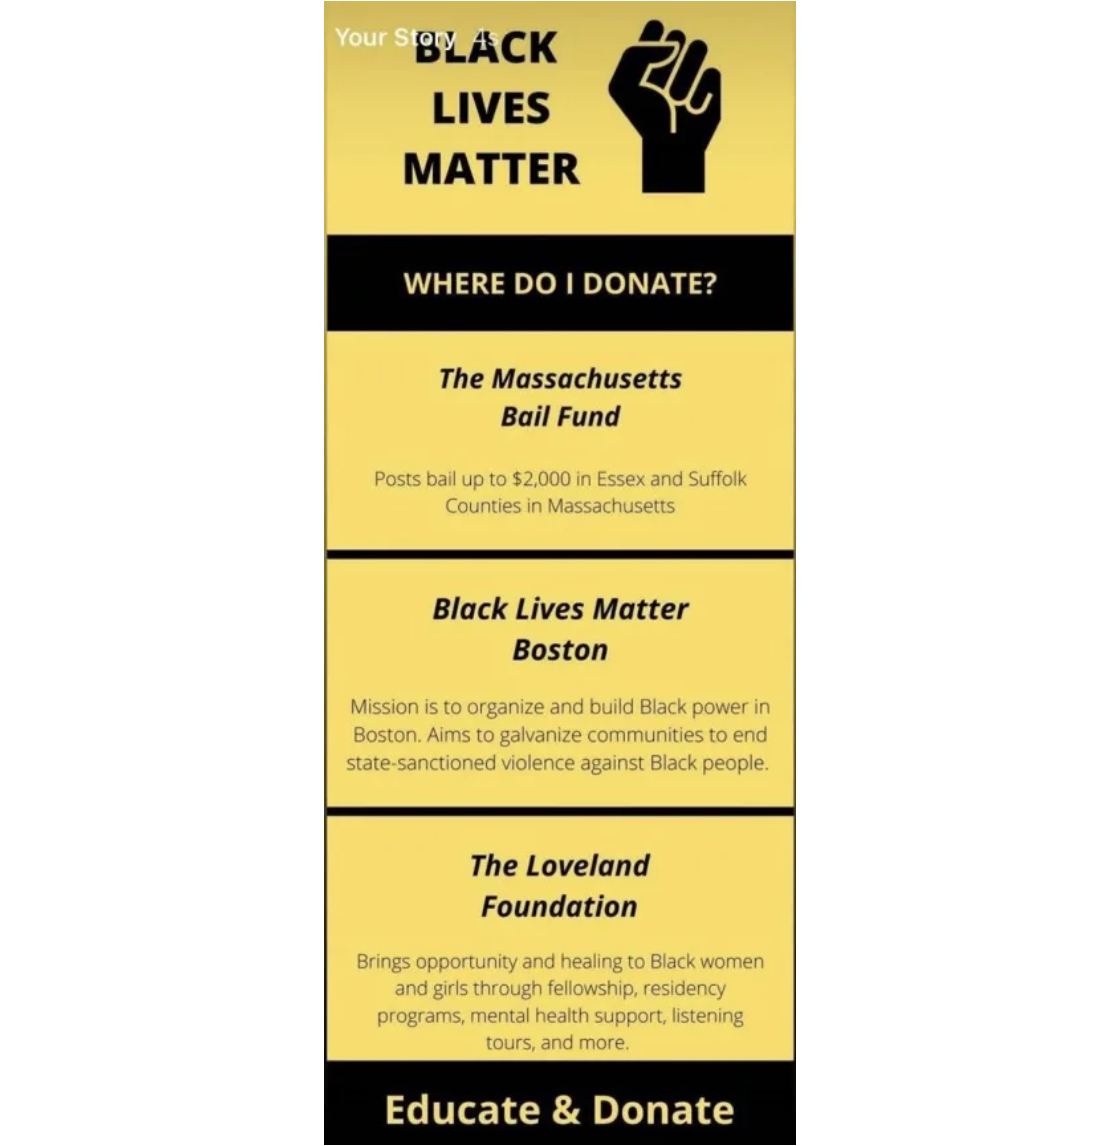 This is a screenshot of a students' example with the Black Lives Matter infographic she created. The infographic is titled “Black Lives Matter: Where Do I donate?” and uses a yellow and black color scheme. The text underneath shows three different organizations to donate to: The Massachusetts Bail Fund, Black Lives Matter Boston, and the Loveland Foundation. The text at the bottom reads “Educate & Donate.”